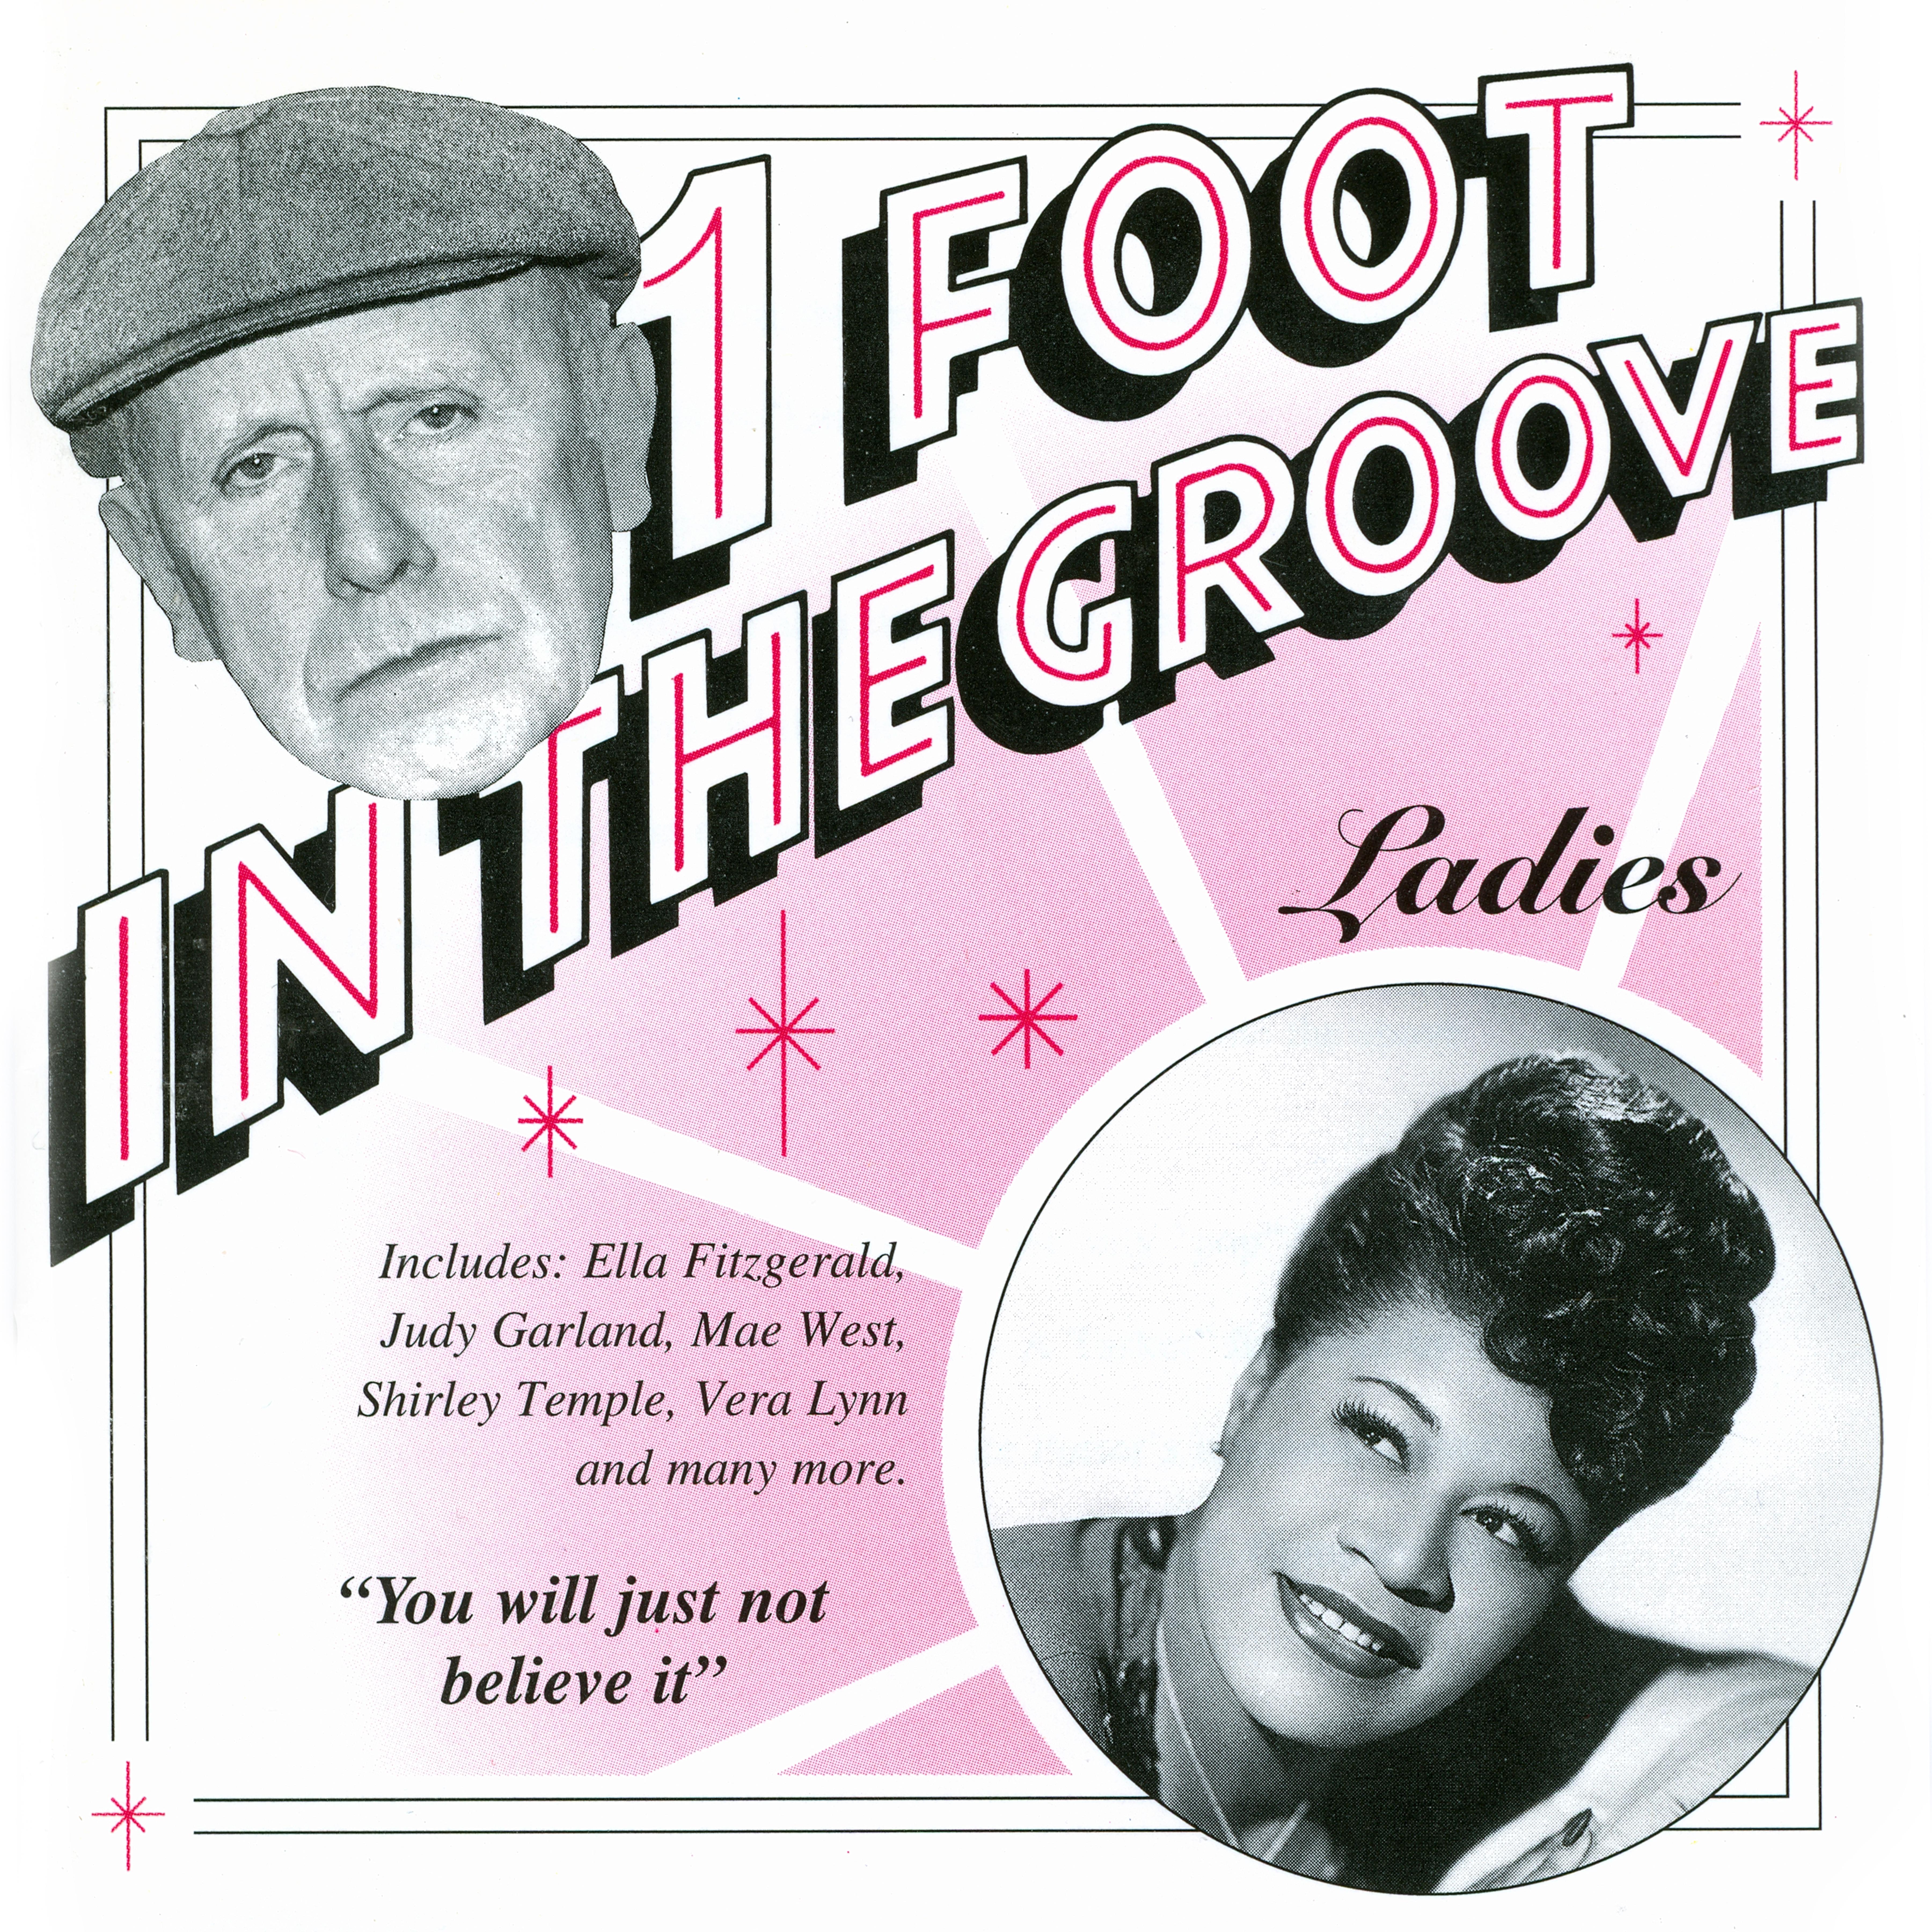 One Foot In The Groove: Ladies